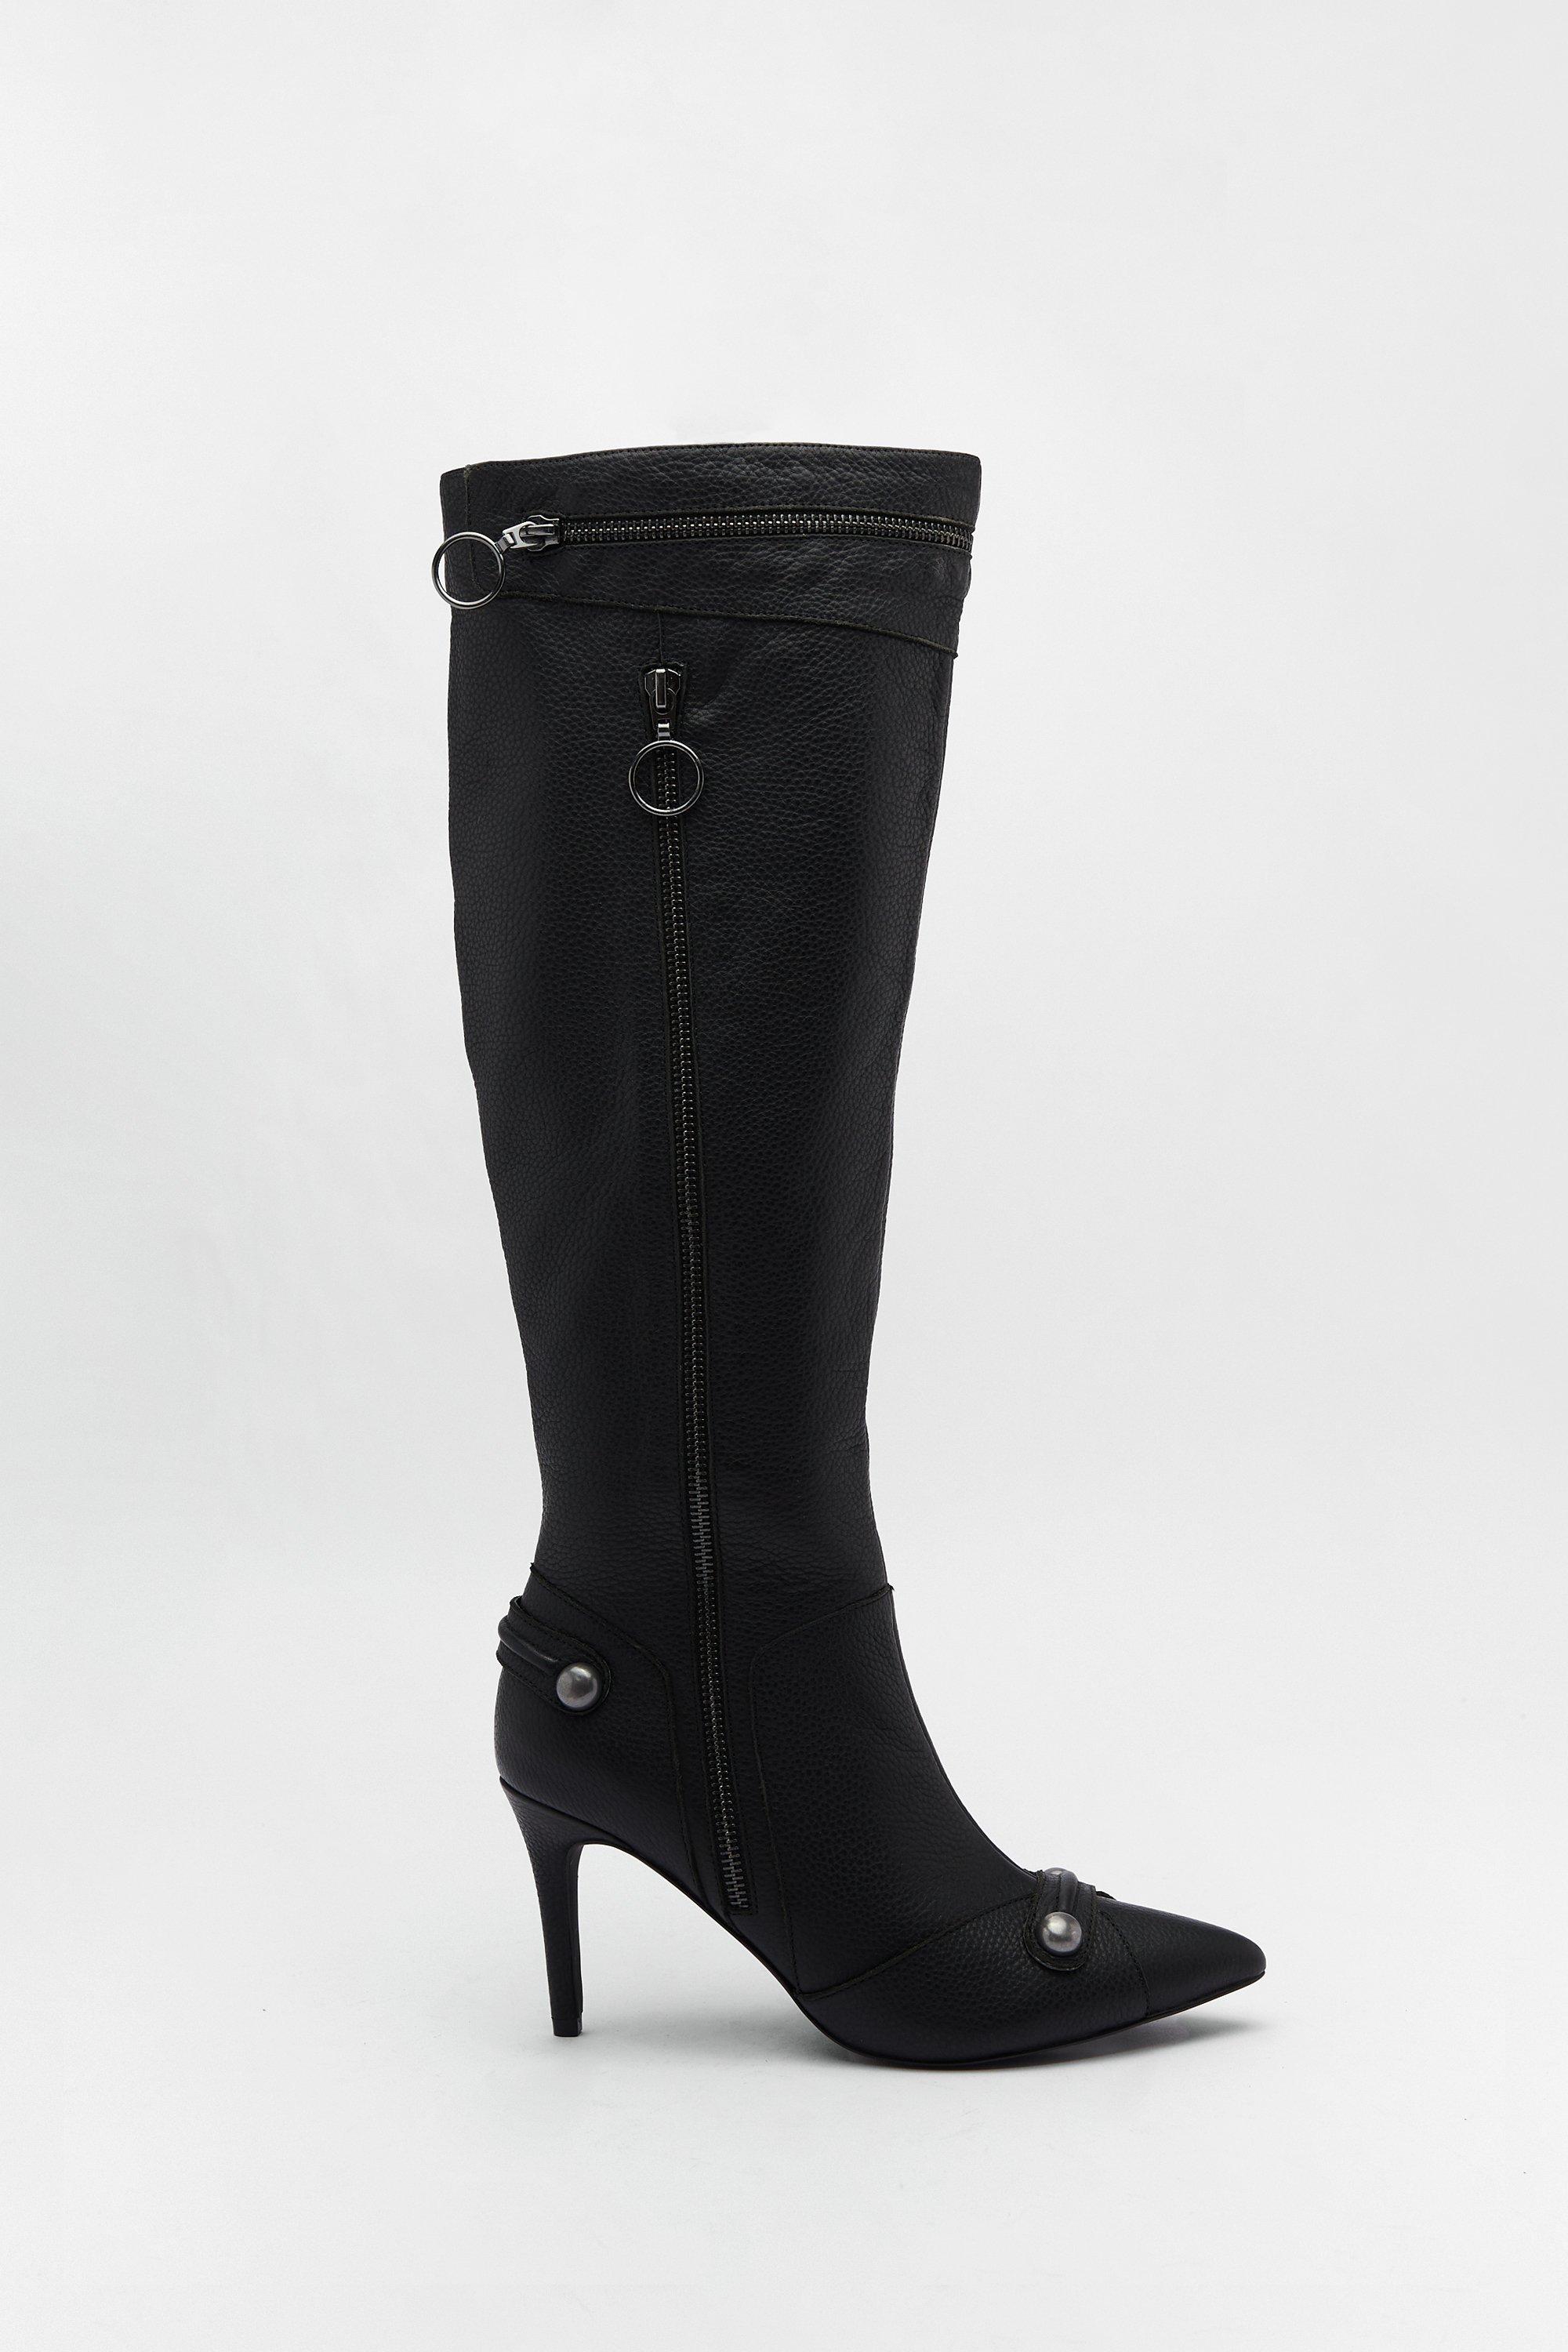 Womens Leather Zip & Stud Pointed Toe Knee High Boots - black